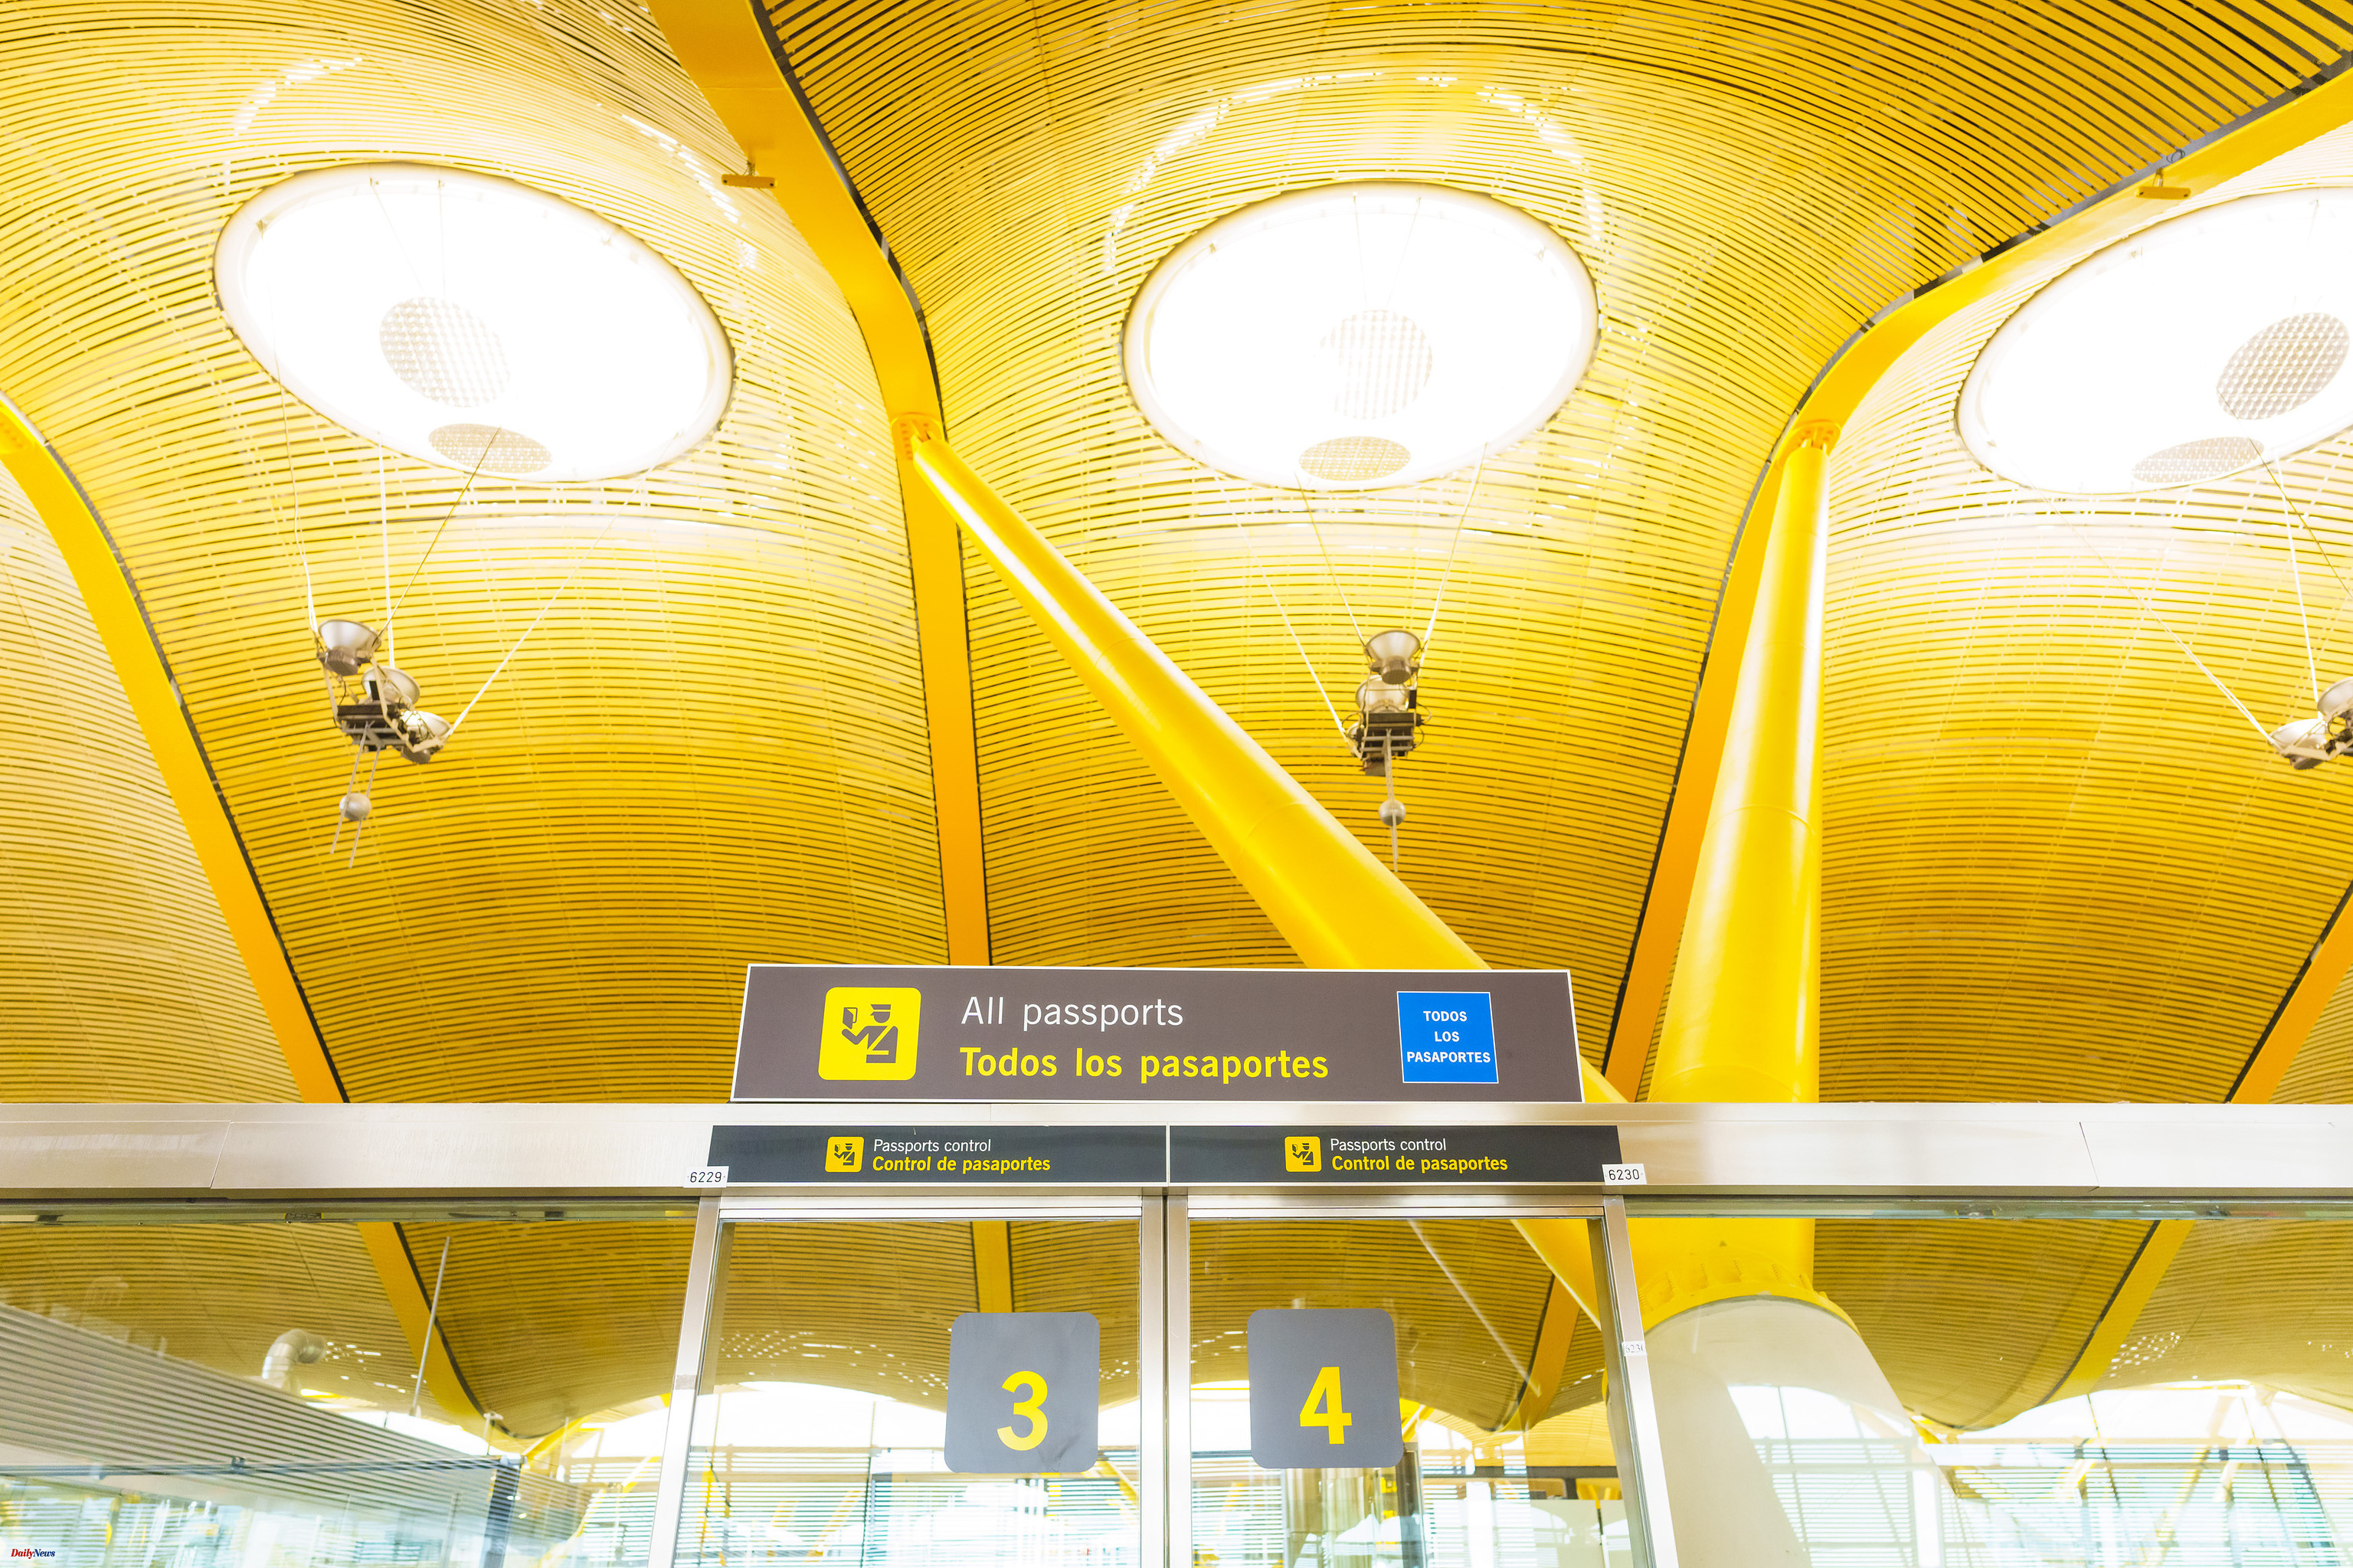 Spain Judges ask the Interior to take measures against "overcrowding" in the asylum rooms at Barajas airport